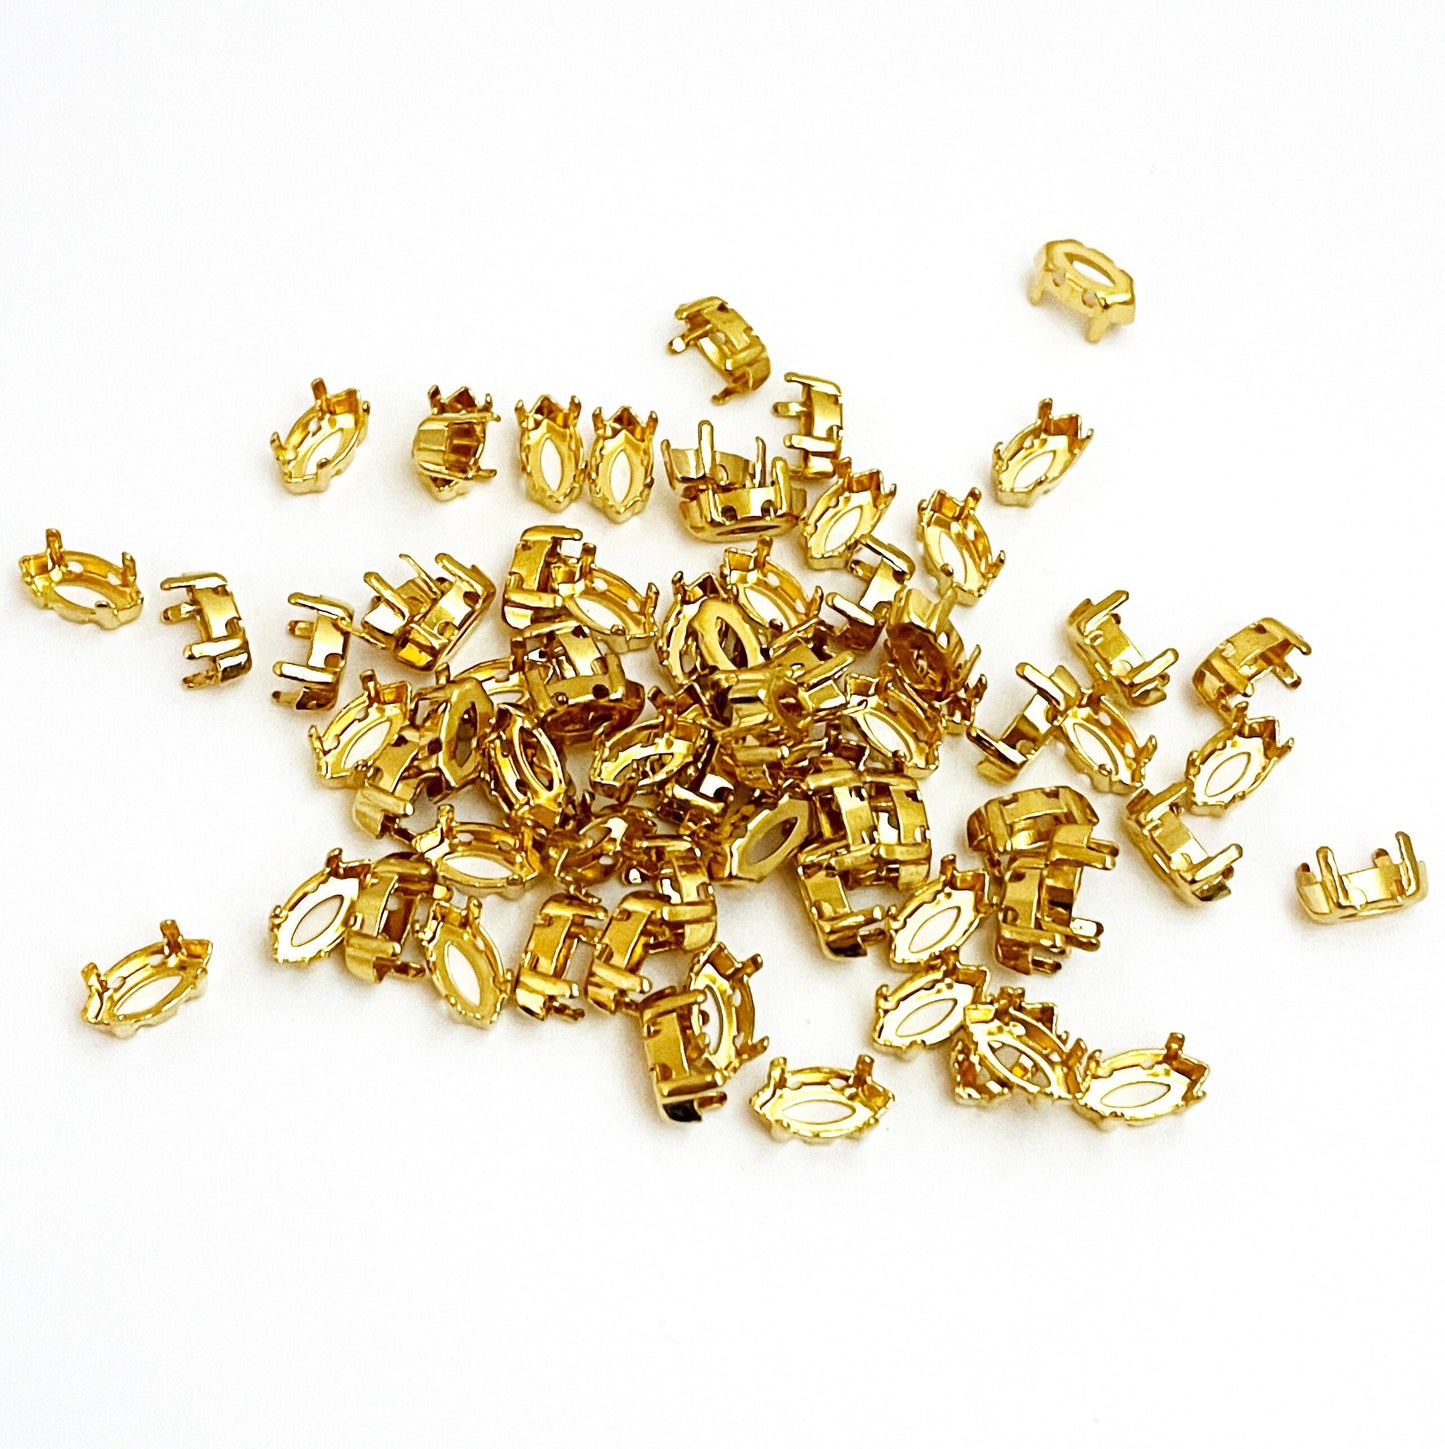 50 pieces Gold Plated Sew On Navette with Open Back for 10x5mm